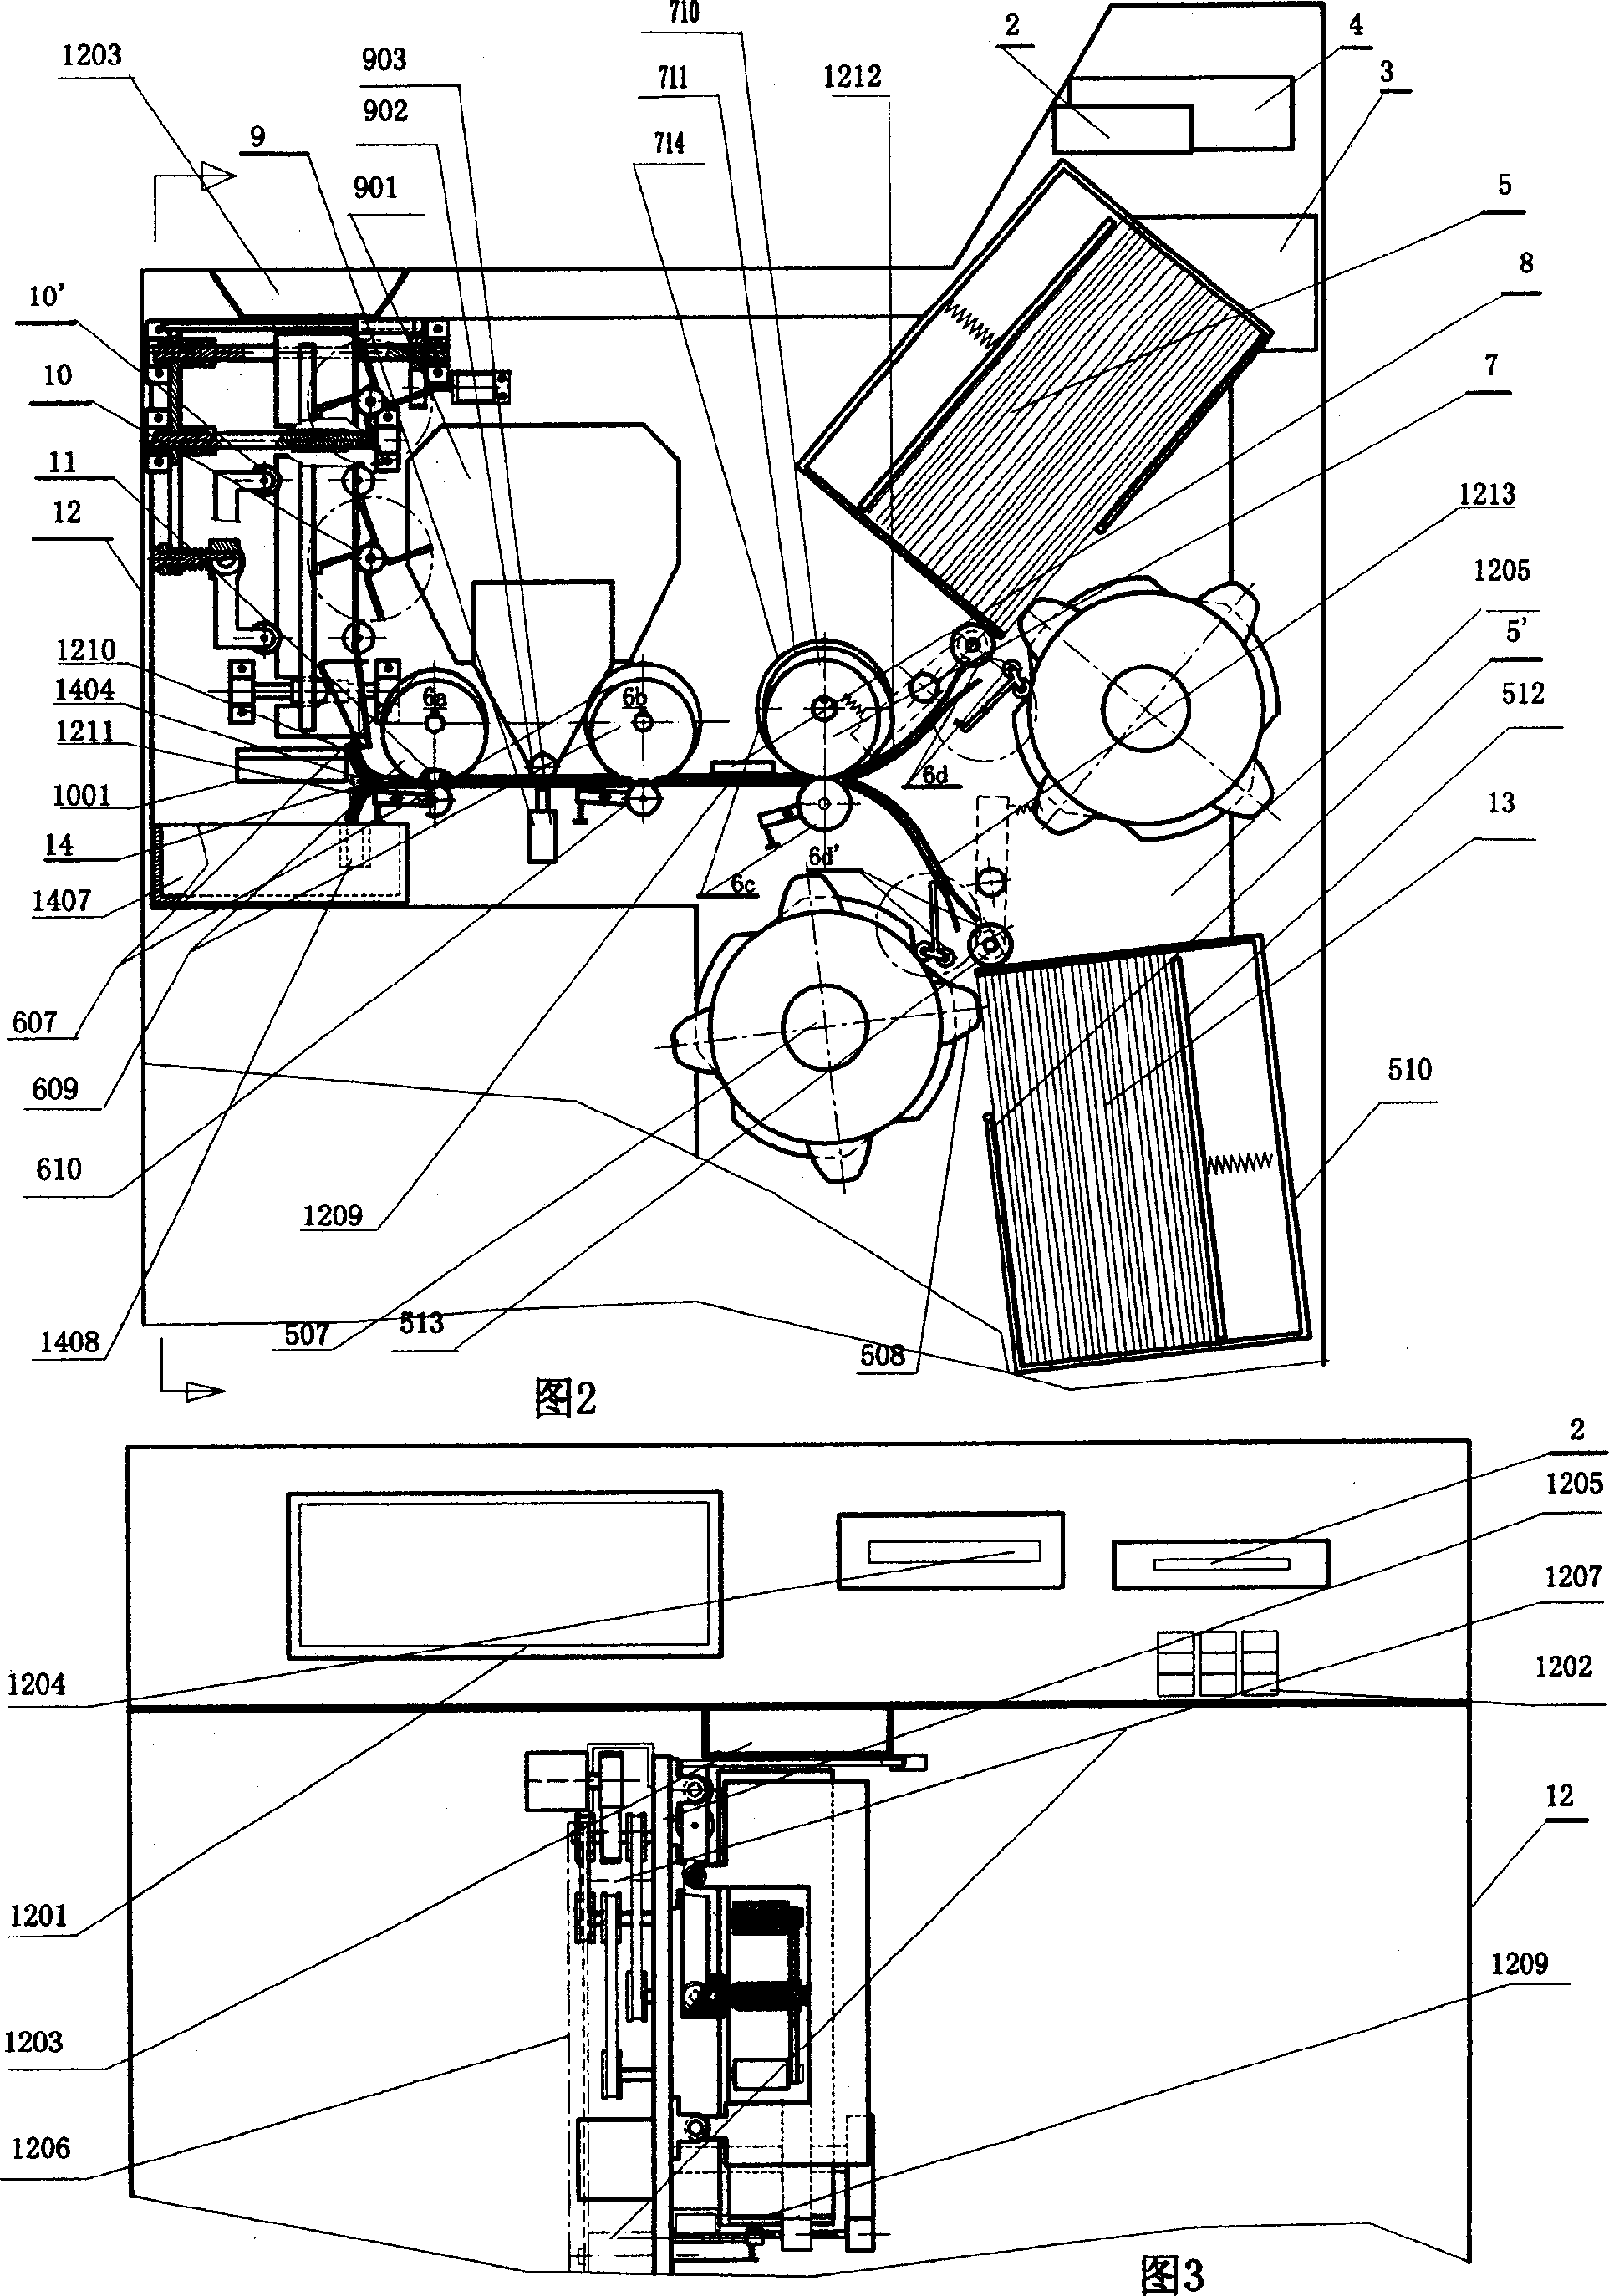 Self-supporting bank check selling device